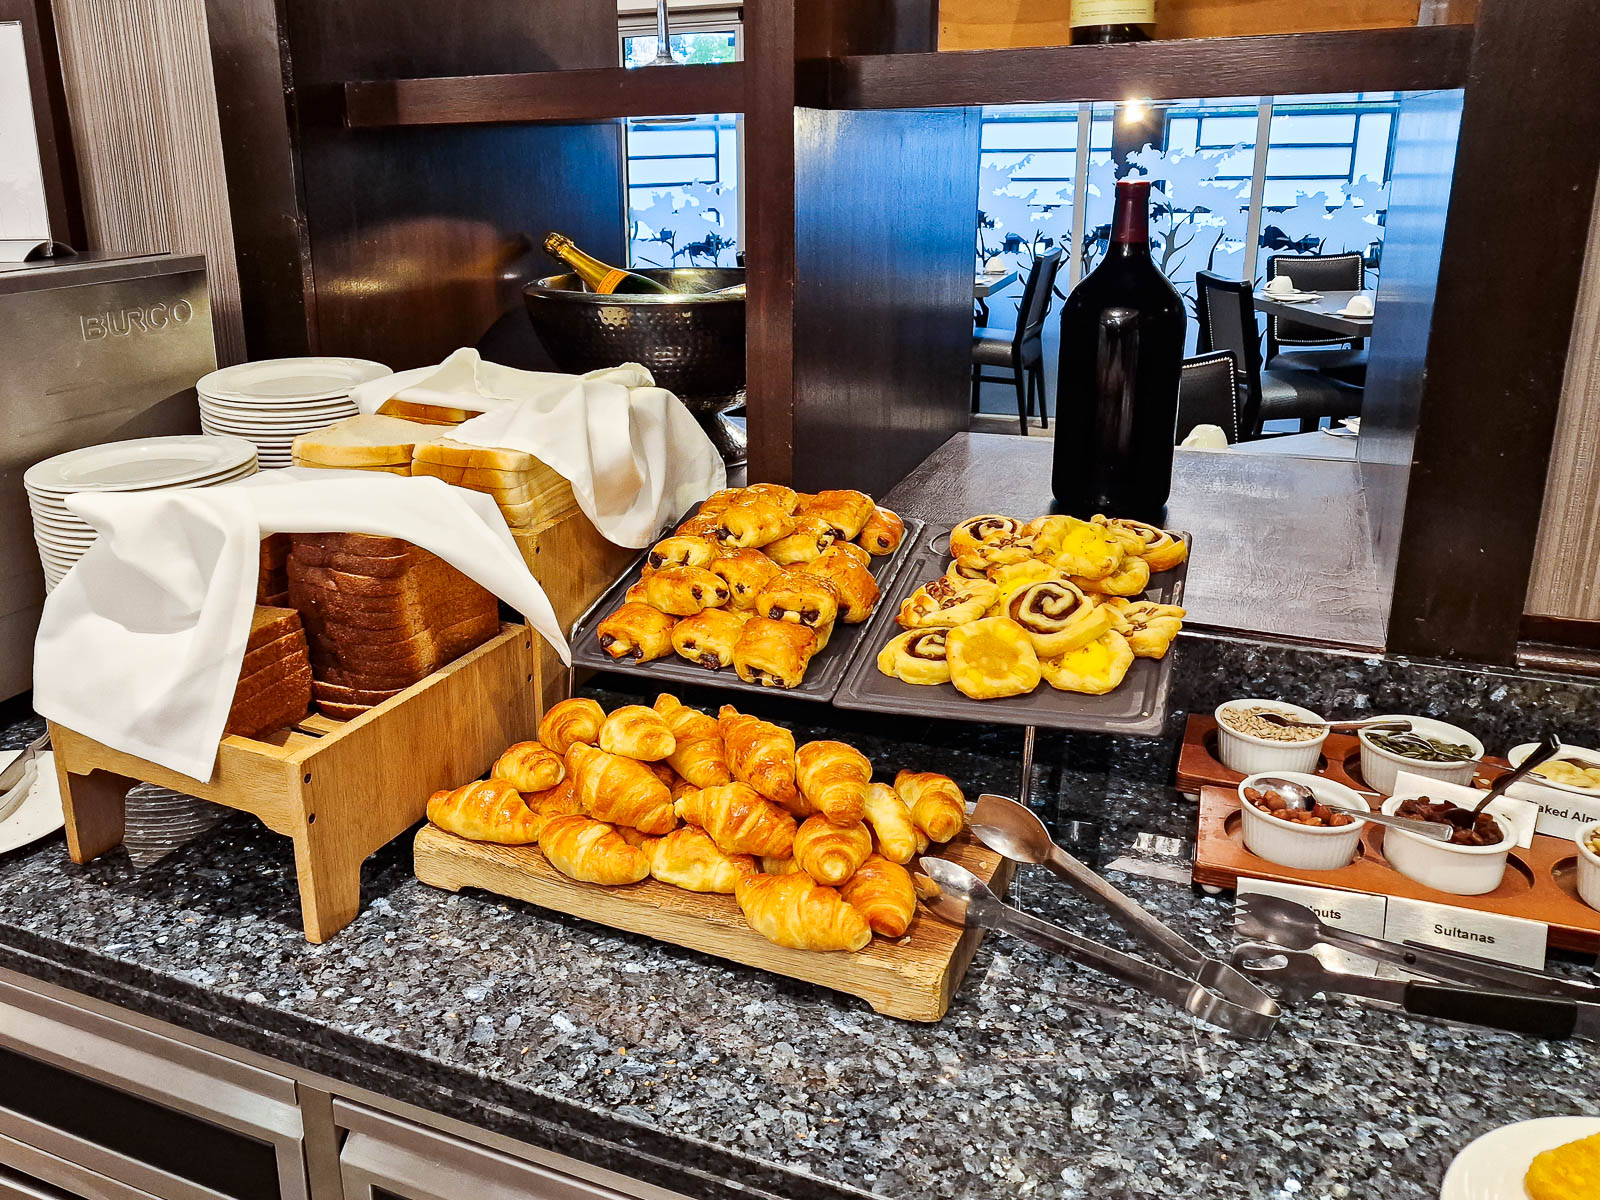 A selection of breads and pastries for the breakfast selection in the Winchester hotel